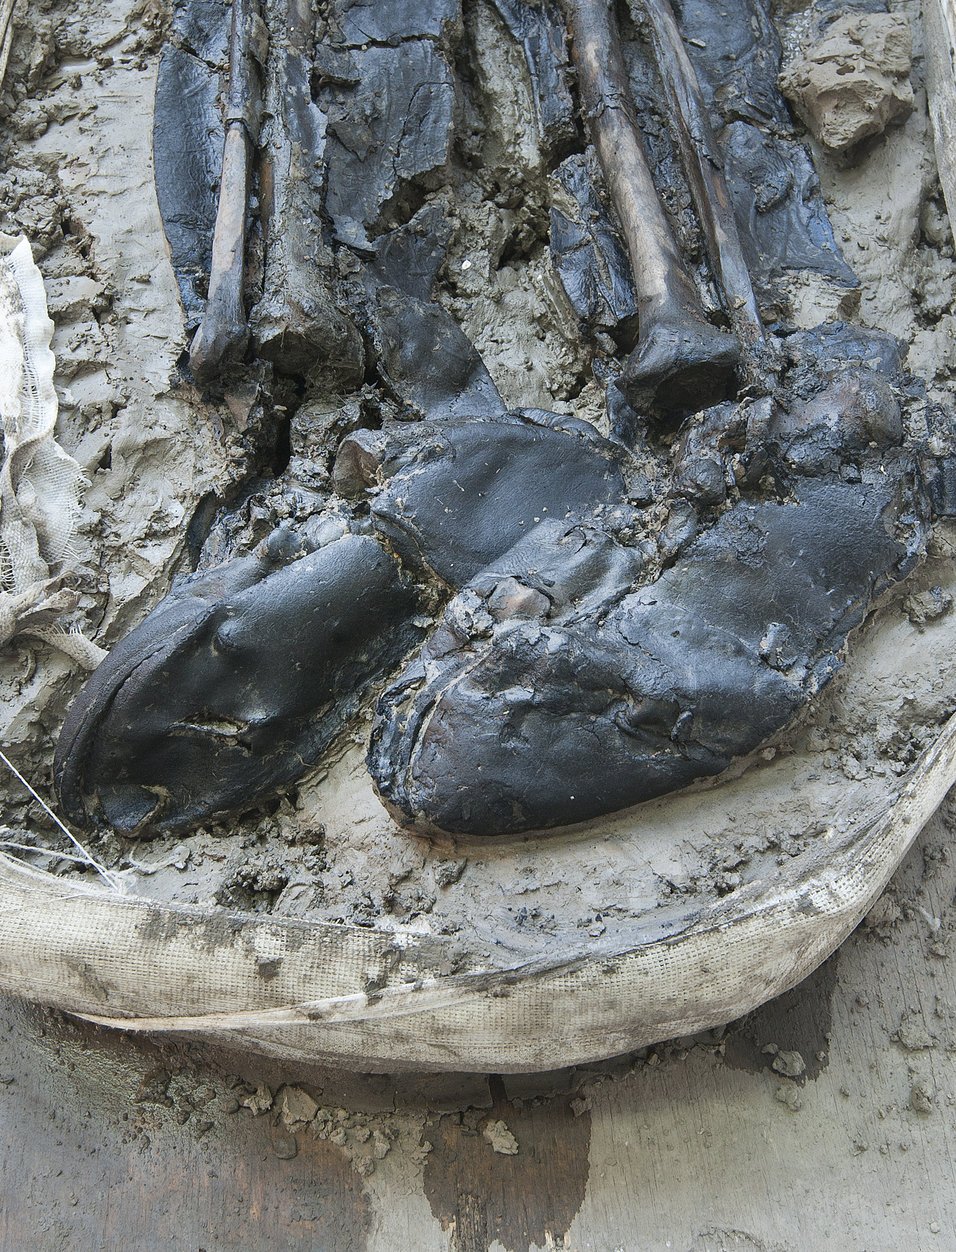 rsz_the_boots_discovered_on_the_skeleton_of_a_medieval_man_during_tideway_excavations_c_mola_headland_infrastructure.jpg